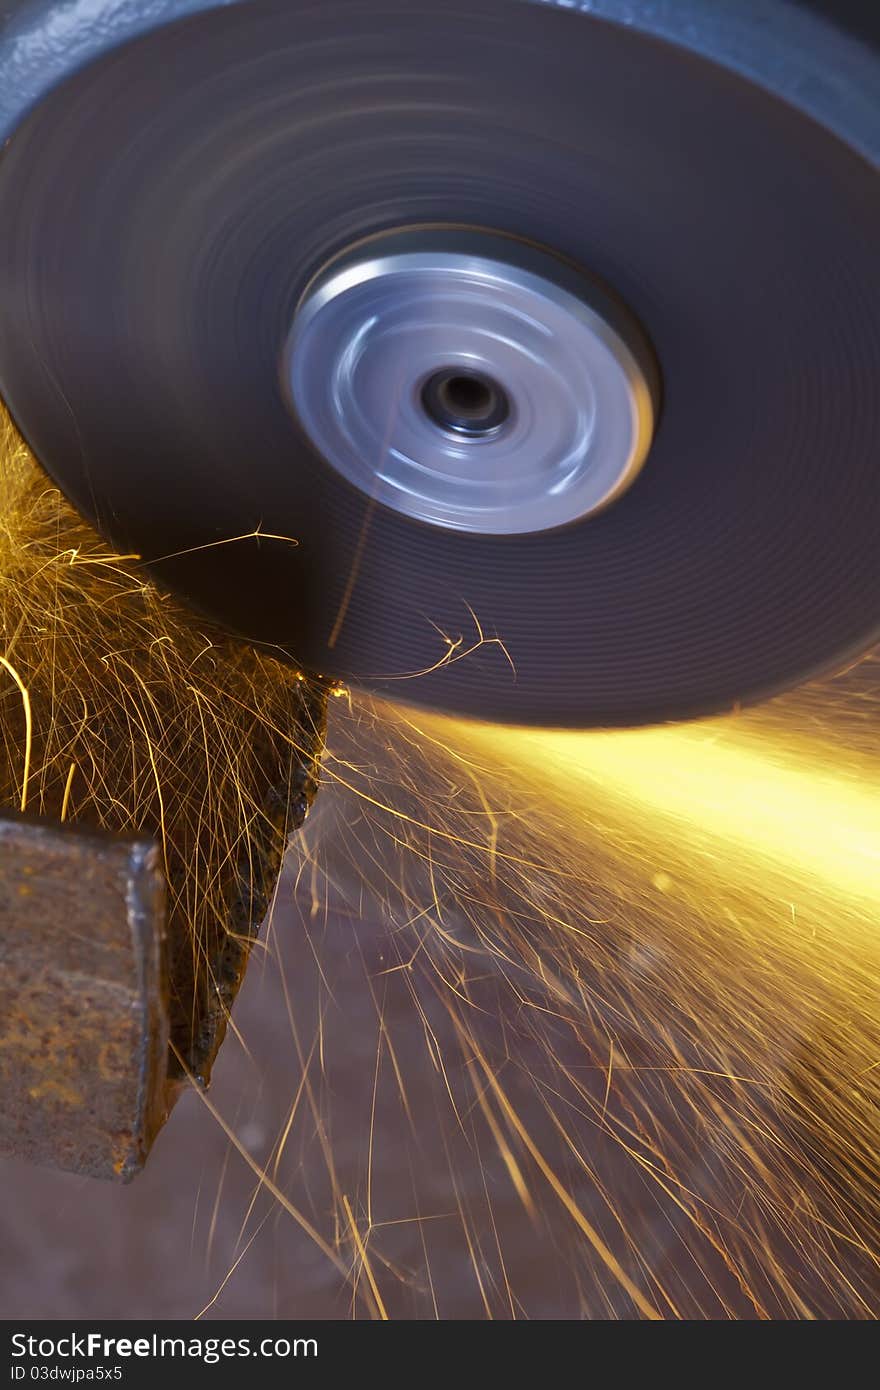 A man working with grinder, close up on tool, sparks fly, real situation picture